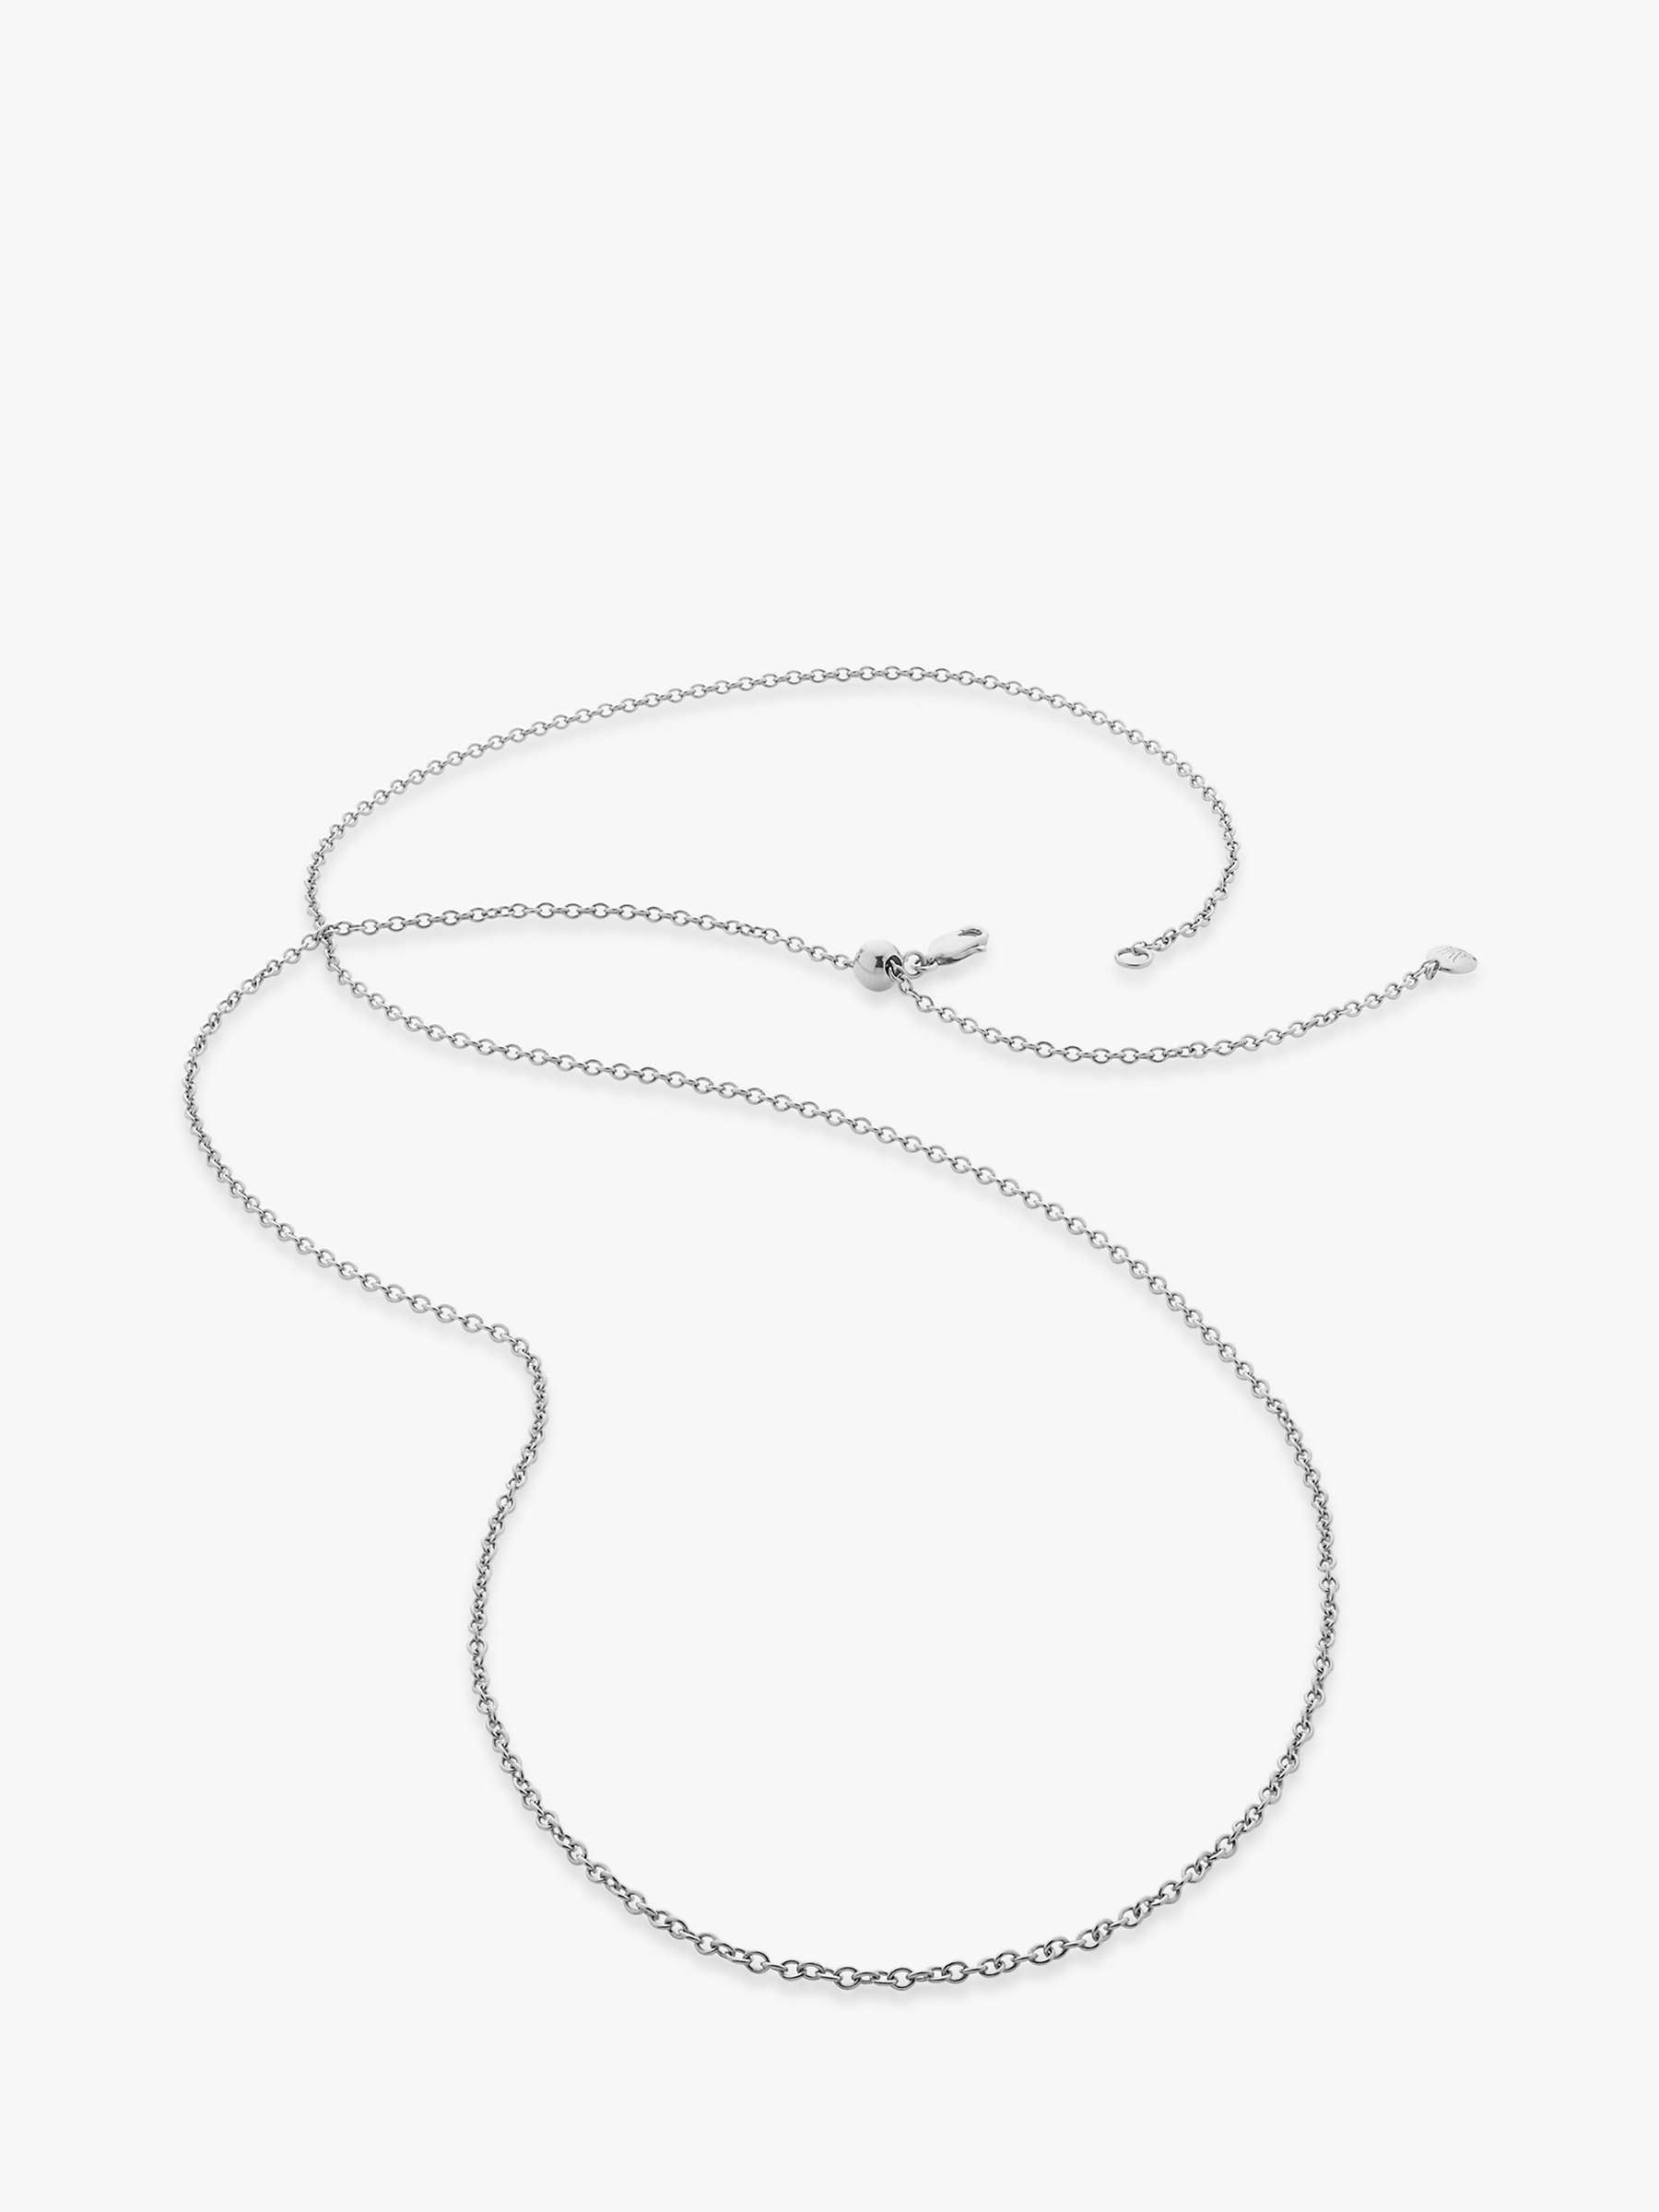 Buy Monica Vinader Rolo Chain Necklace Online at johnlewis.com